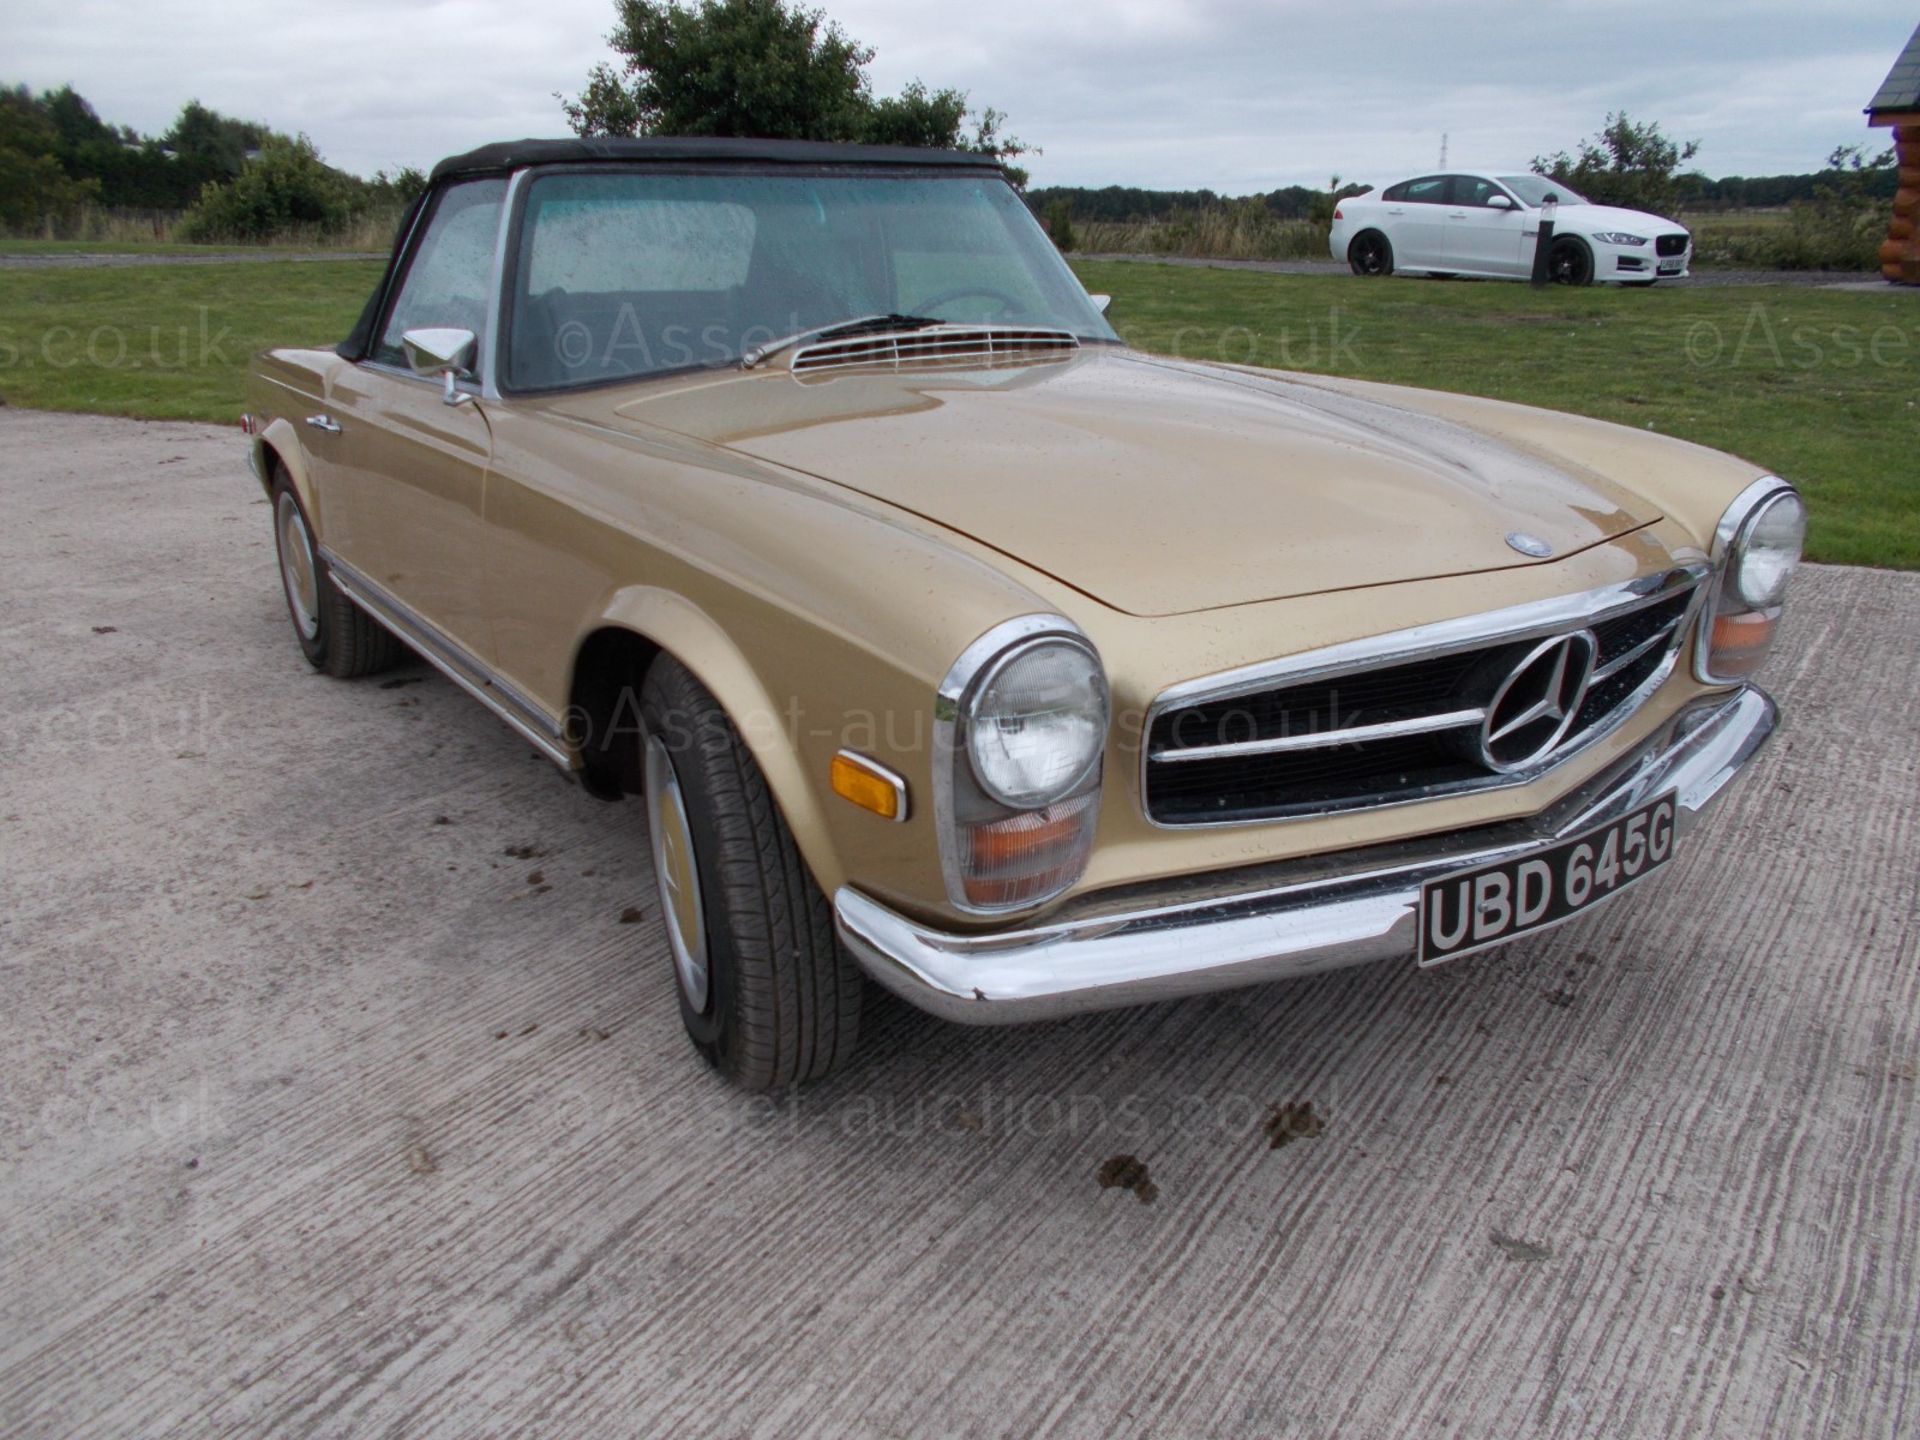 1969 MERCEDES 280SL PAGODA, AUTOMATIC, HARD/SOFT TOPS, LEFT HAND DRIVE, AMERICAN IMPORT *PLUS VAT* - Image 10 of 38